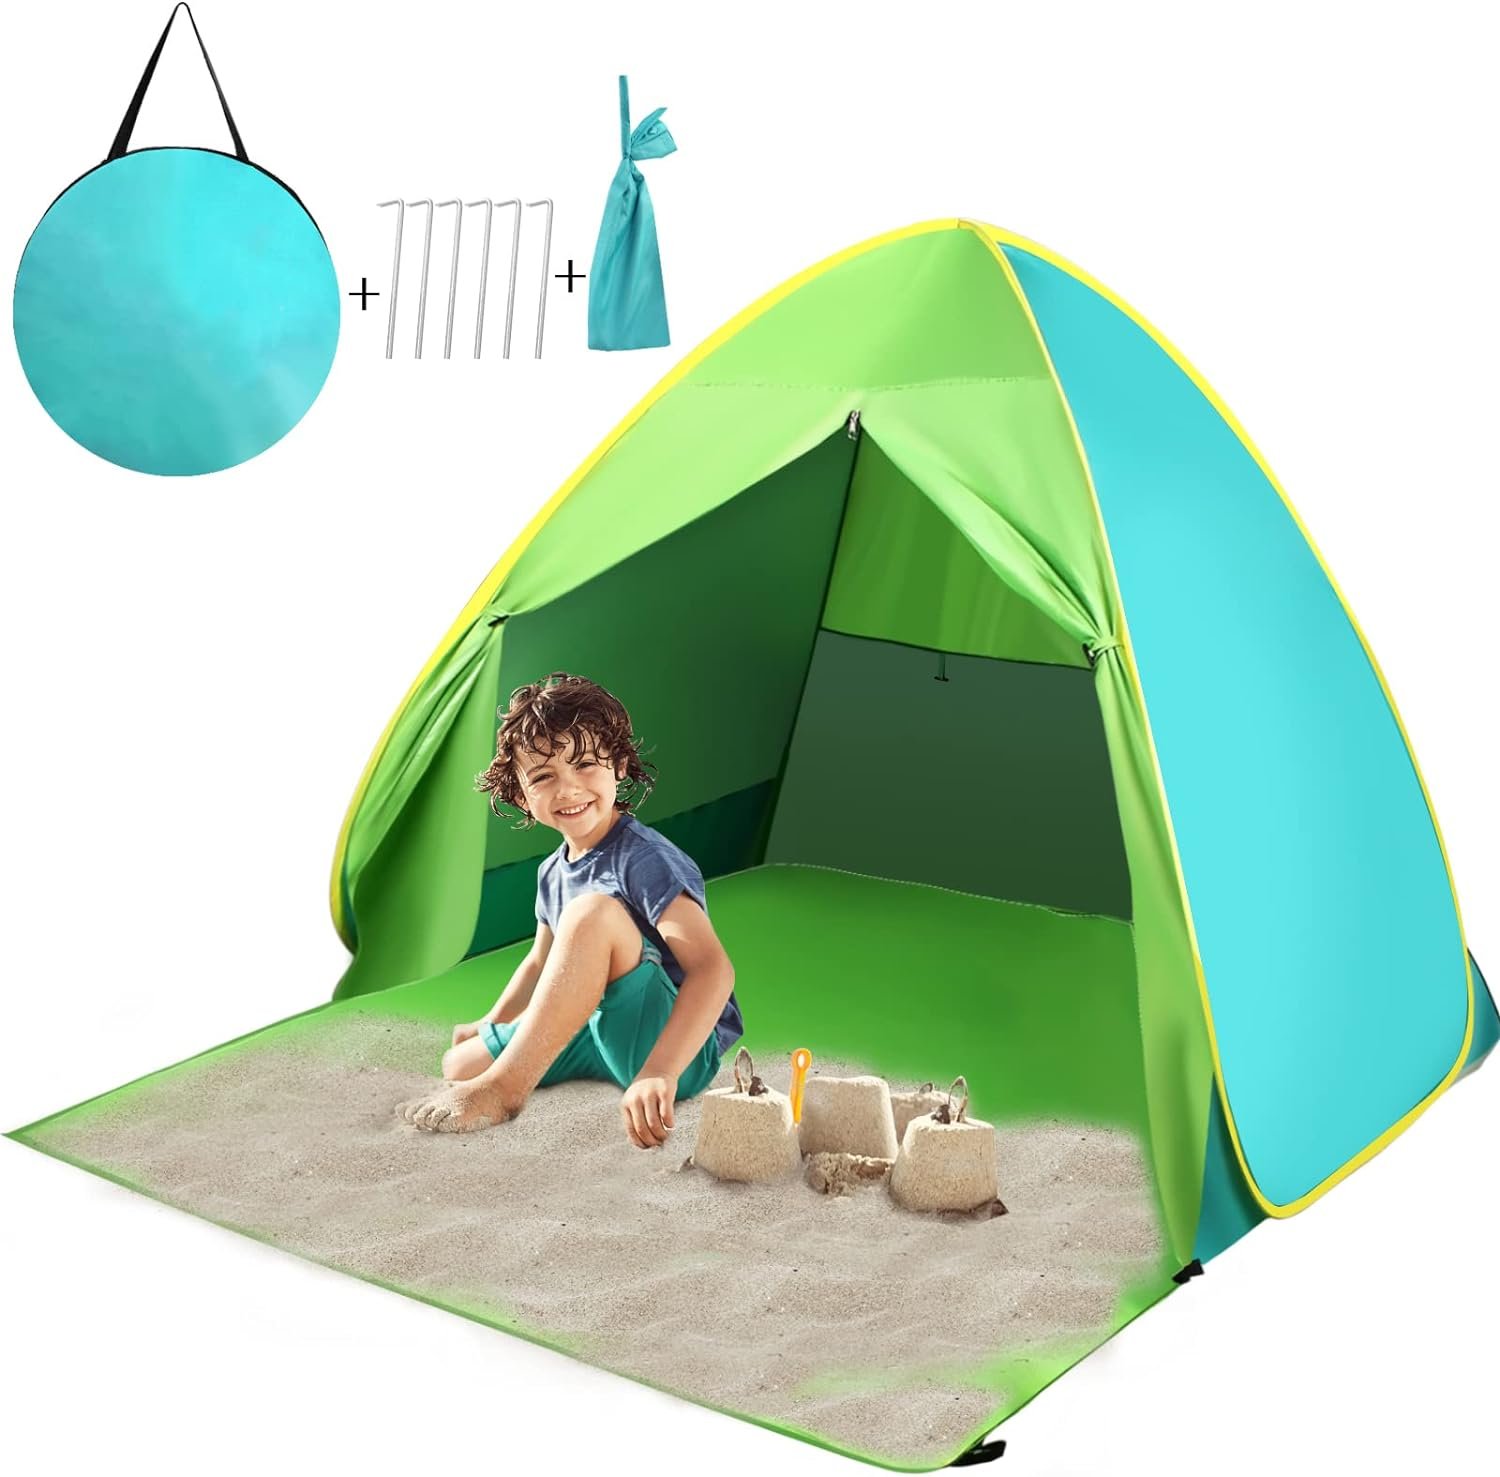 FINCOME Pop Up Beach Tent Review